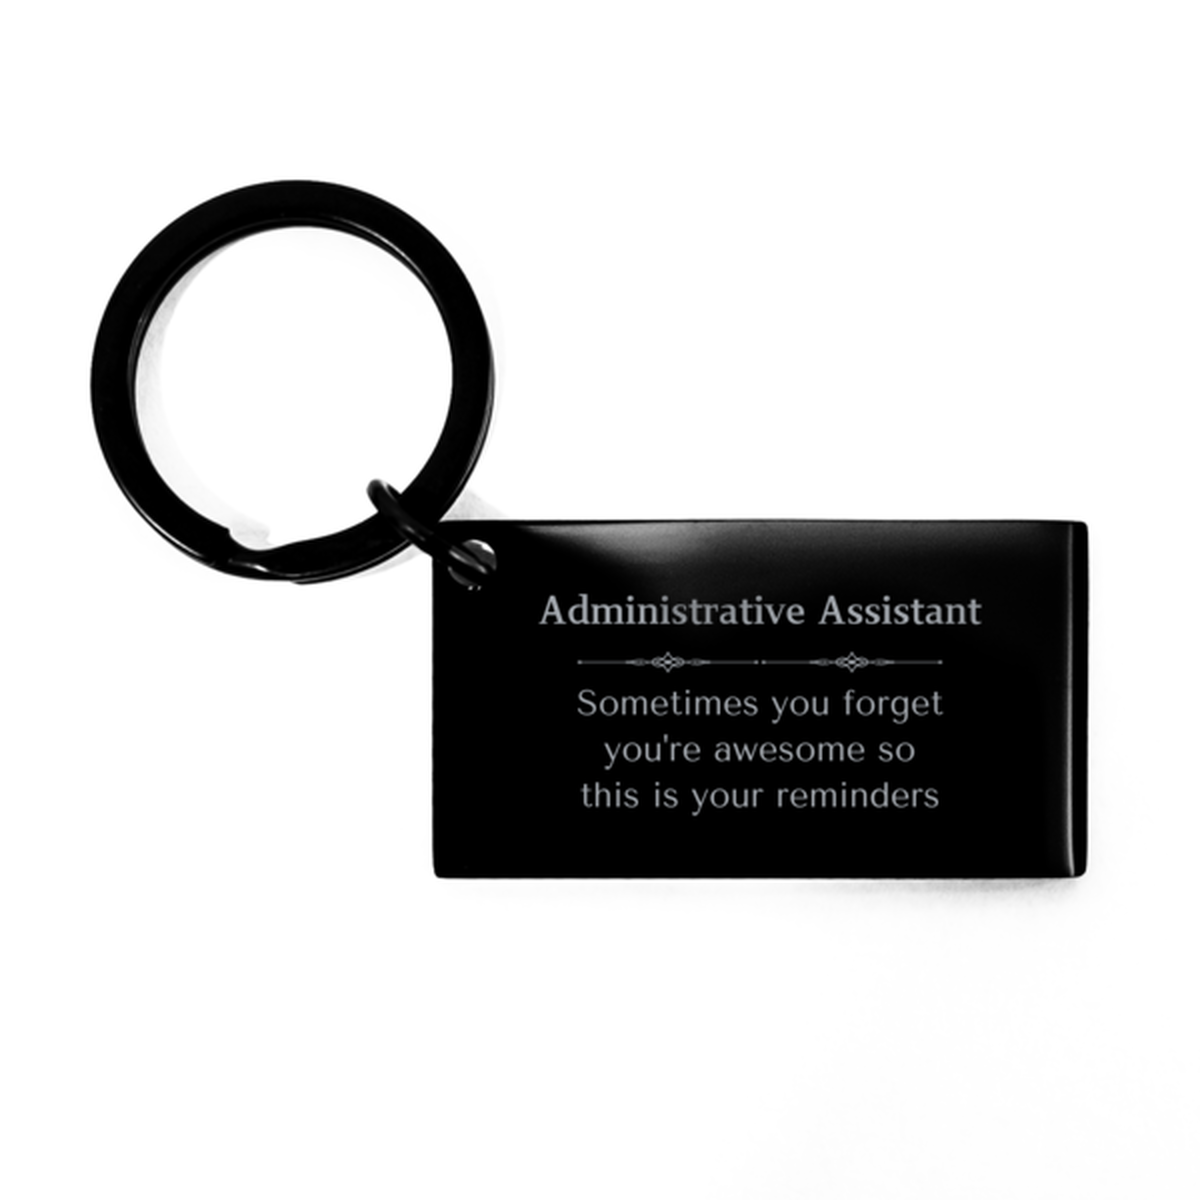 Sentimental Administrative Assistant Keychain, Butcher Sometimes you forget you're awesome so this is your reminders, Graduation Christmas Birthday Gifts for Administrative Assistant, Men, Women, Coworkers